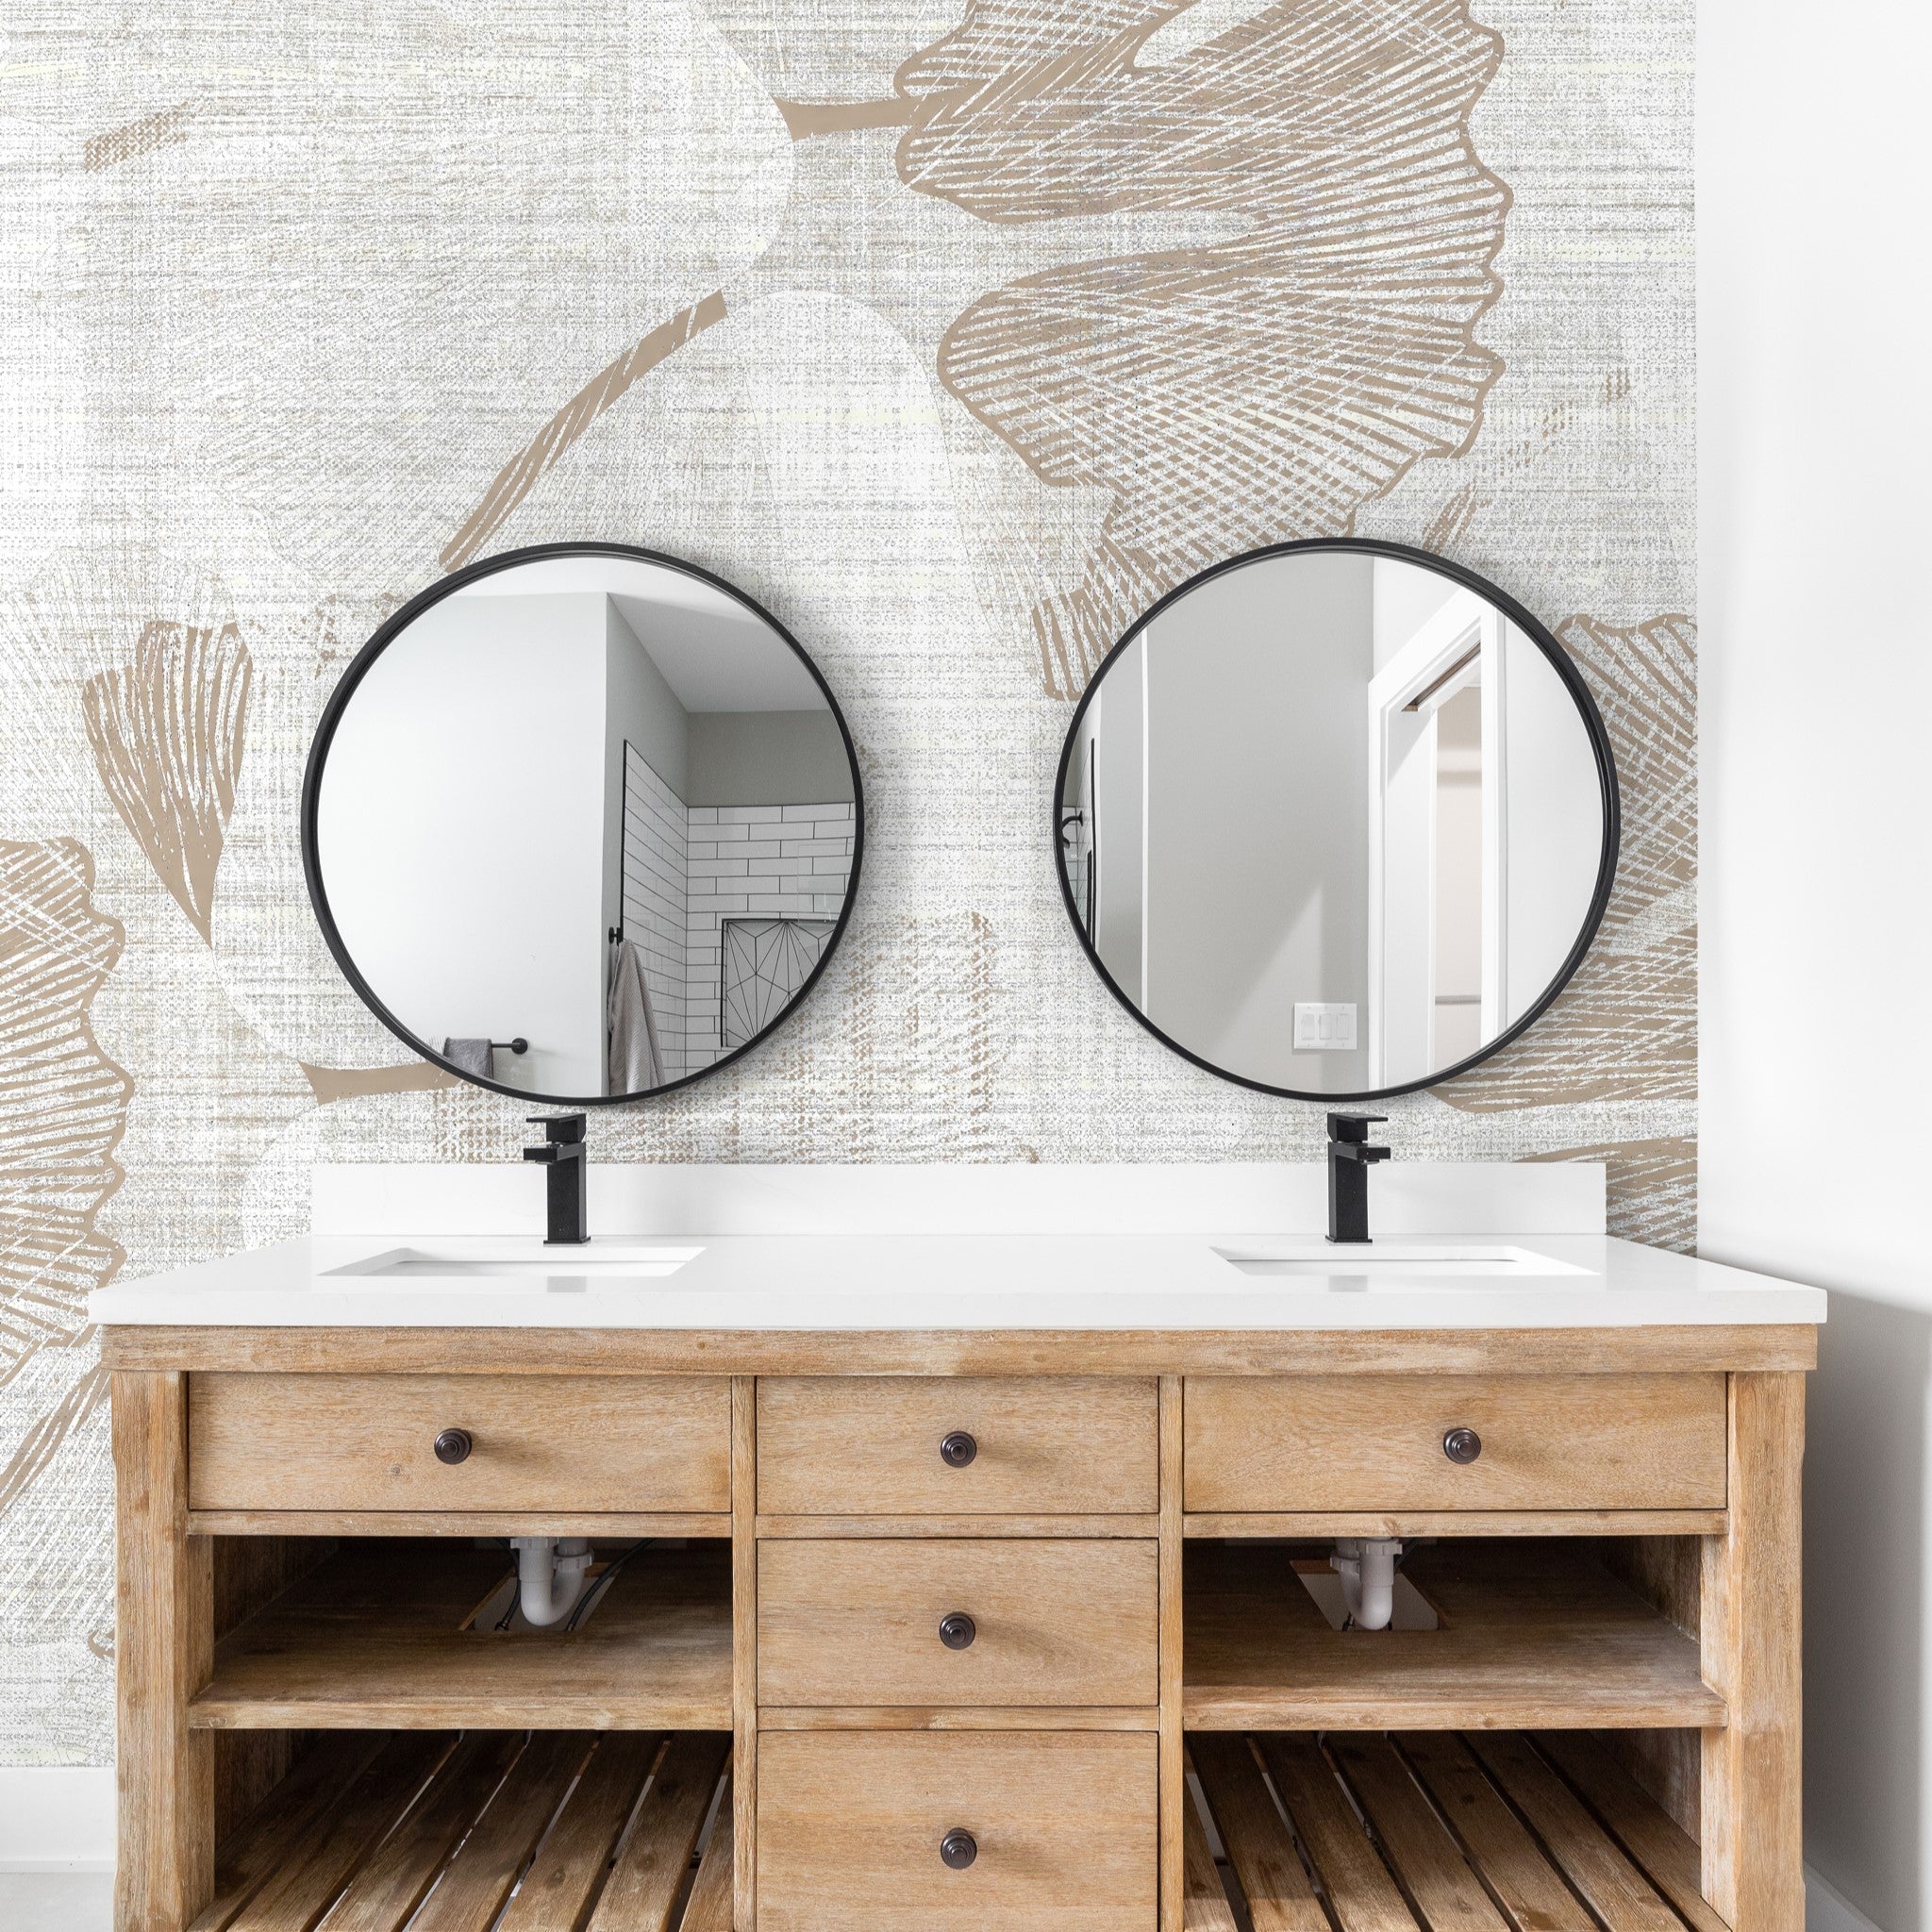 "Wall Blush Gayle Wallpaper installation in modern bathroom, featuring stylish vanity and round mirrors focused on wall decor."